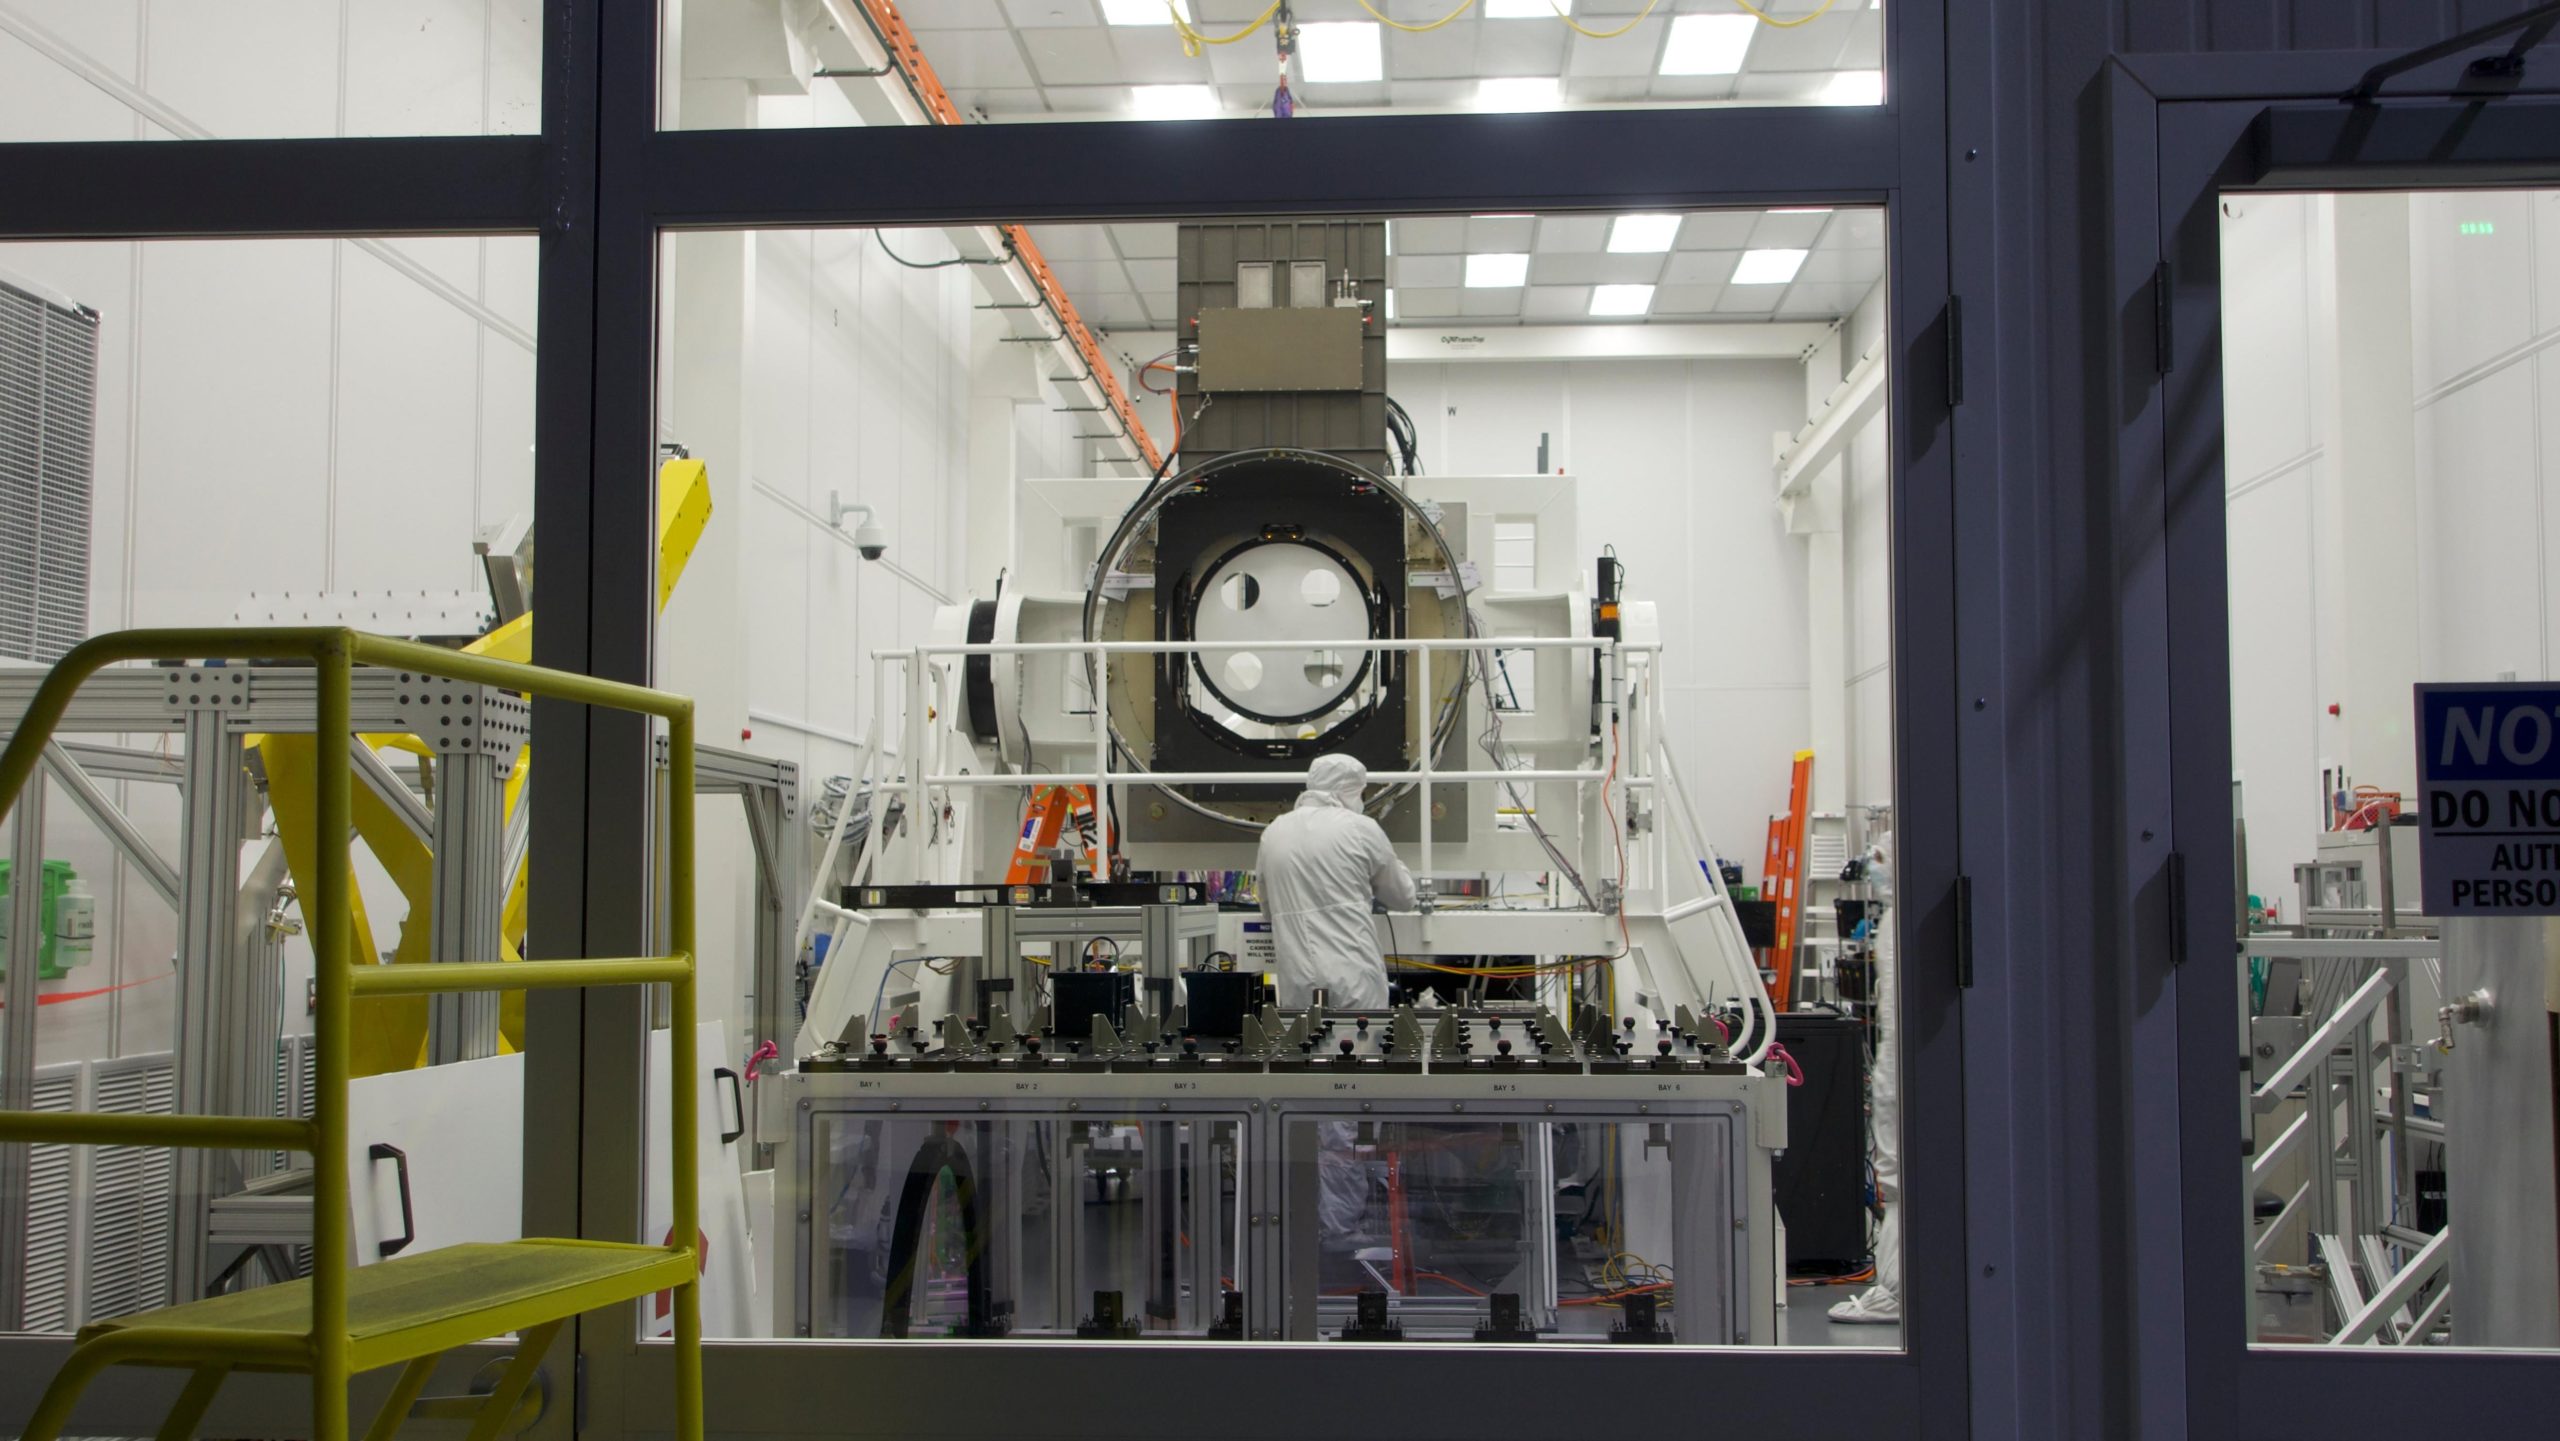 Components of the camera being worked on in a clean room at SLAC National Accelerator Laboratory. (Photo: Isaac Schultz)